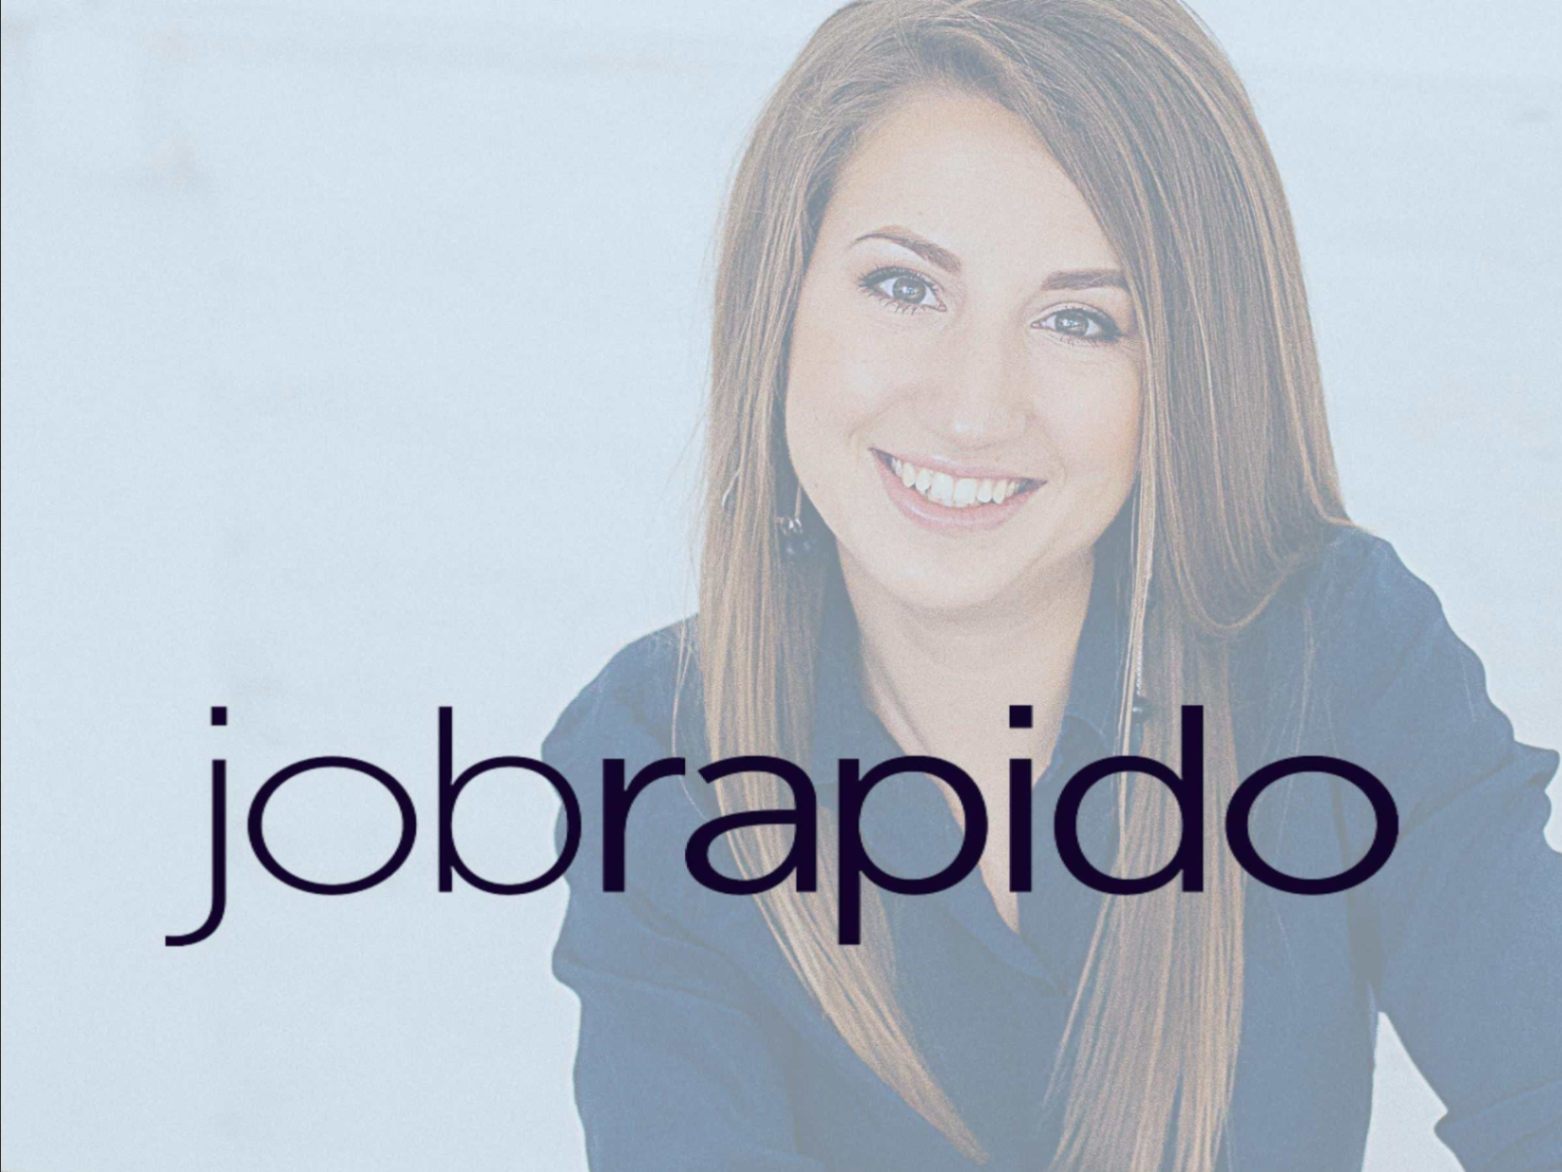 Search For A Job On JobRapido